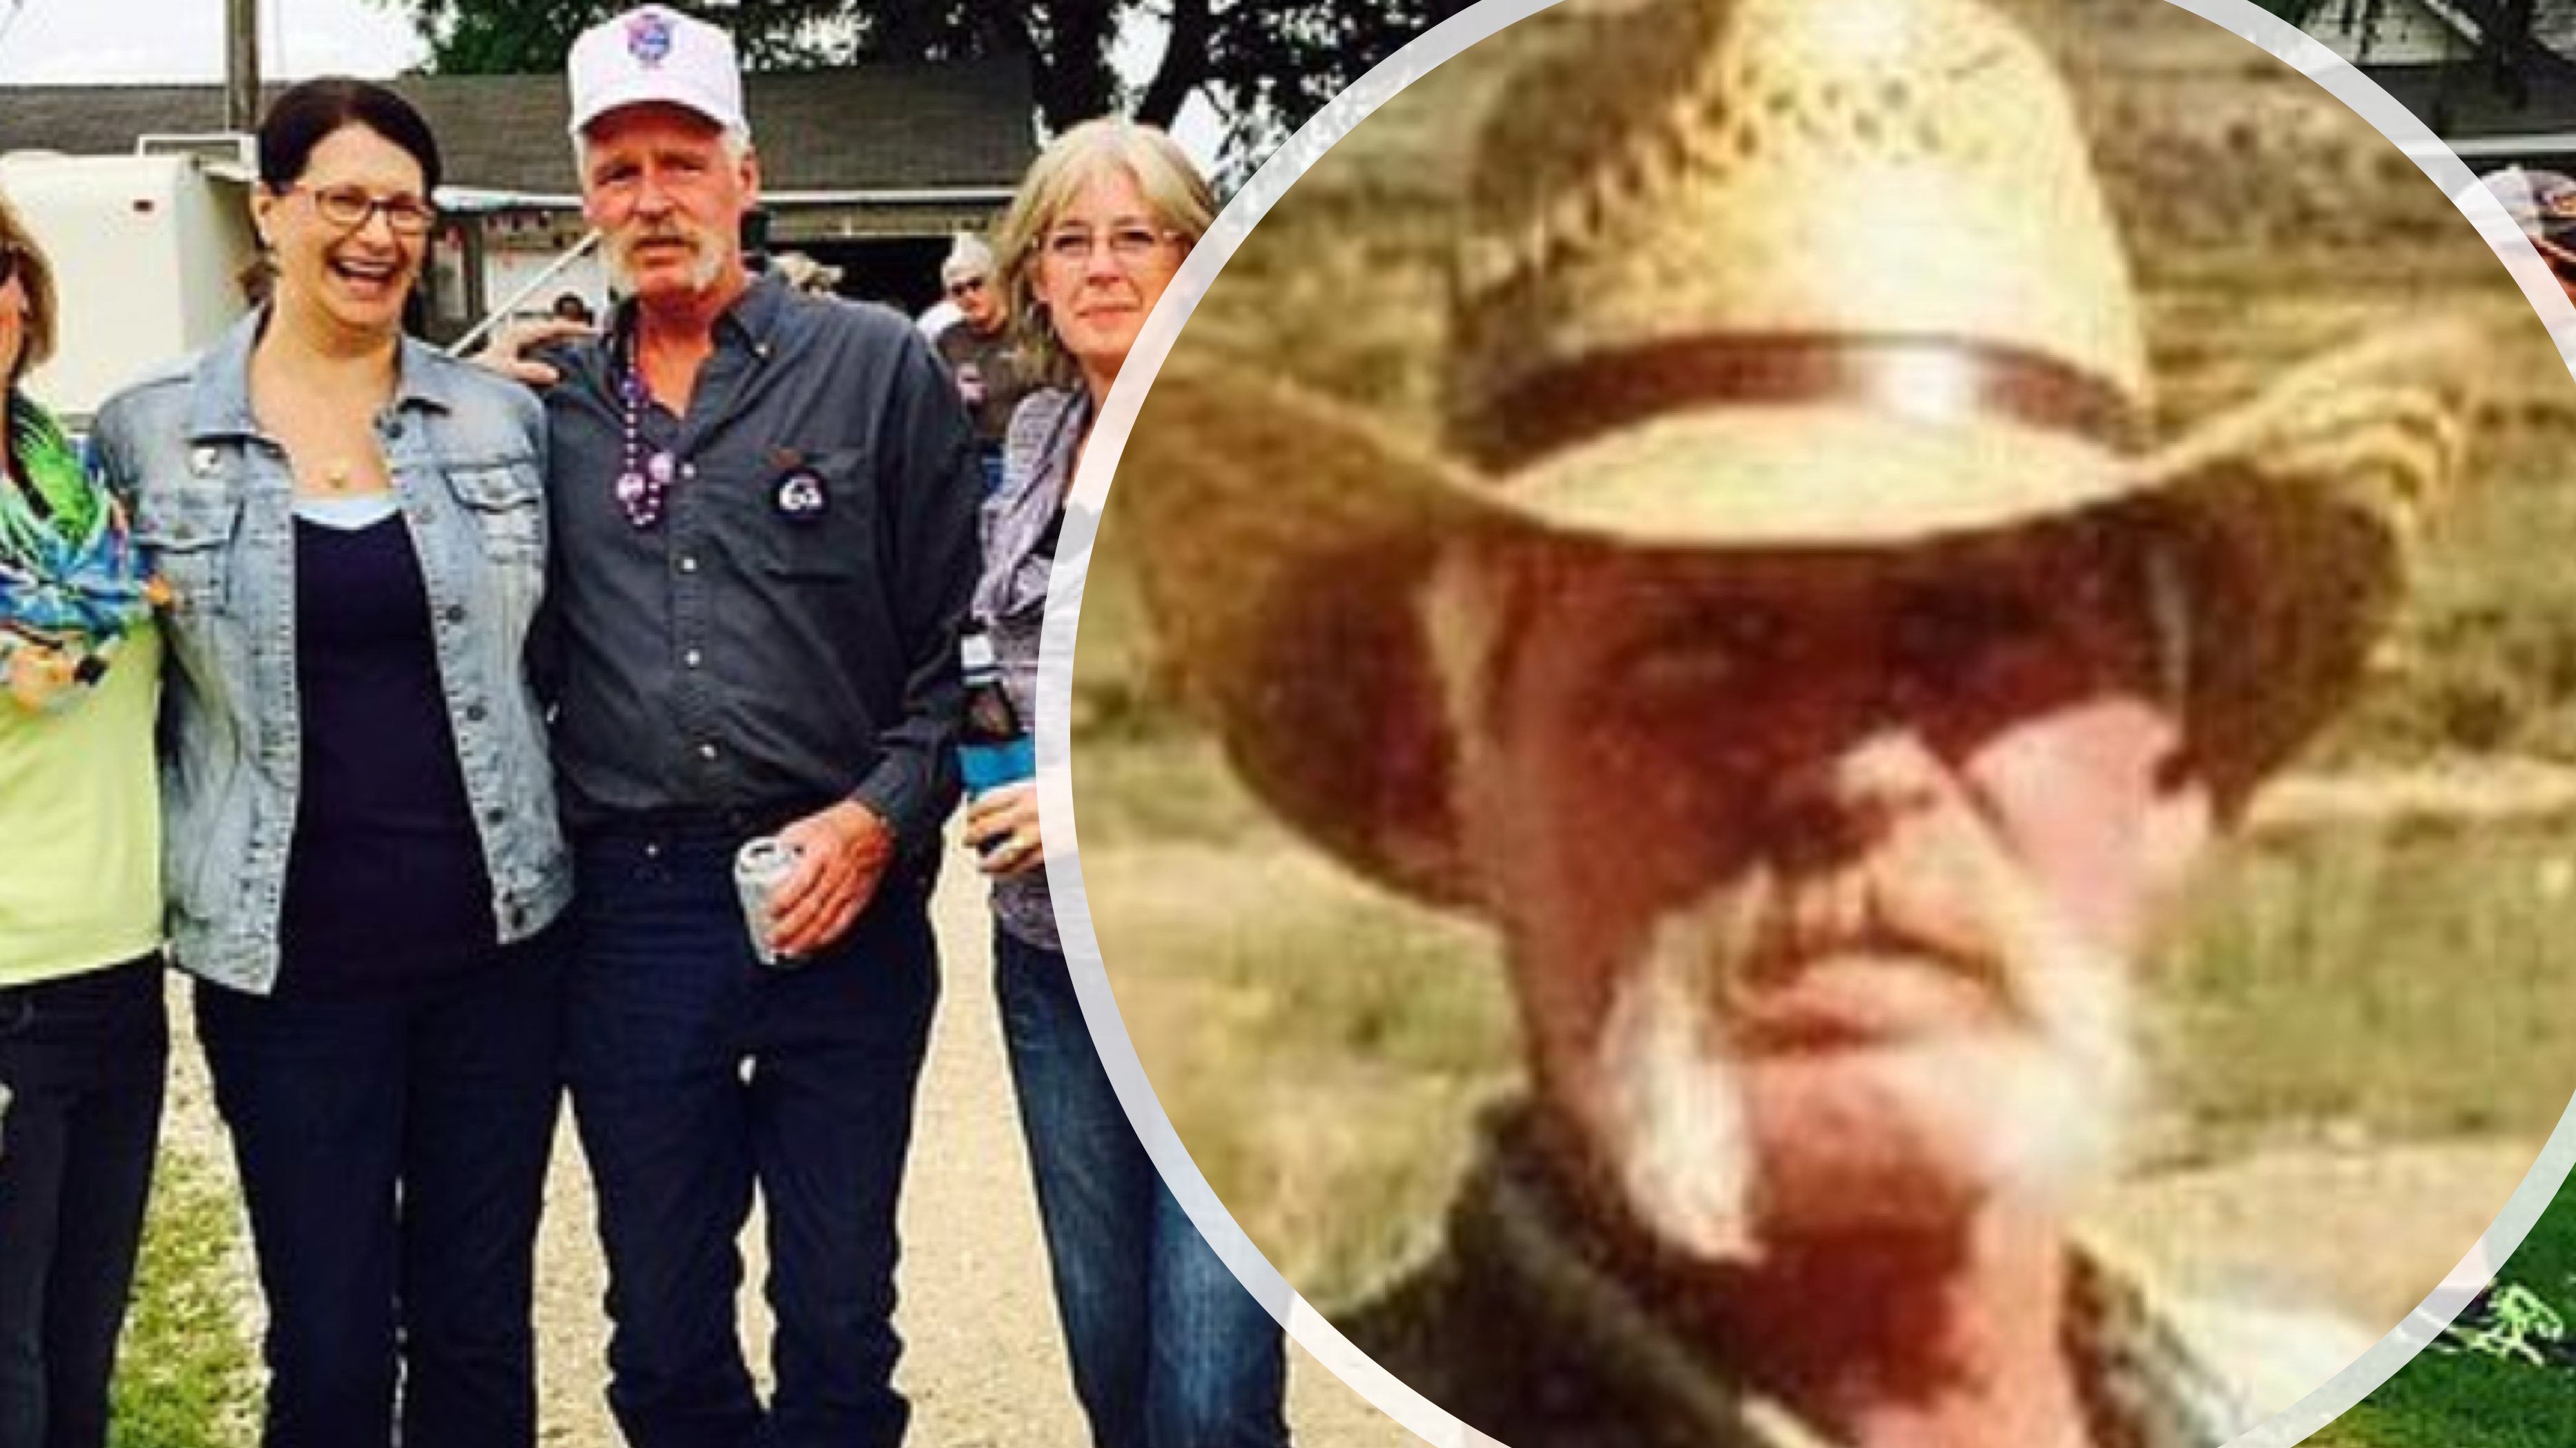 Obituary for Badass Iowa Dad Goes Viral for Its Hilarious Honesty